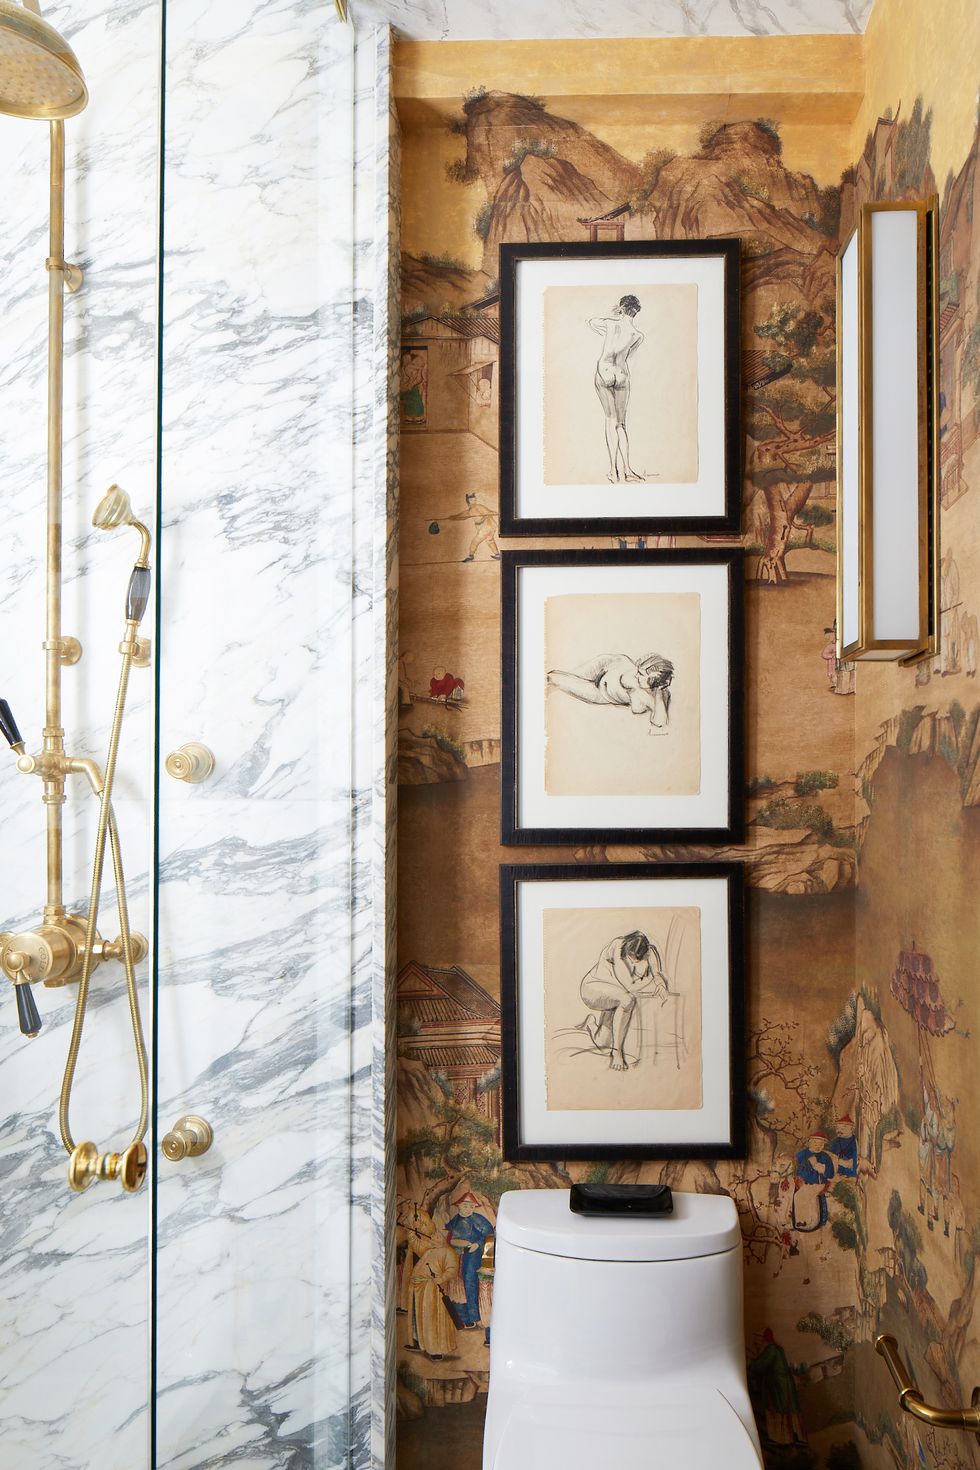 15 Bathrooms With Beautiful Wall Decor That Will Inspire A Refresh